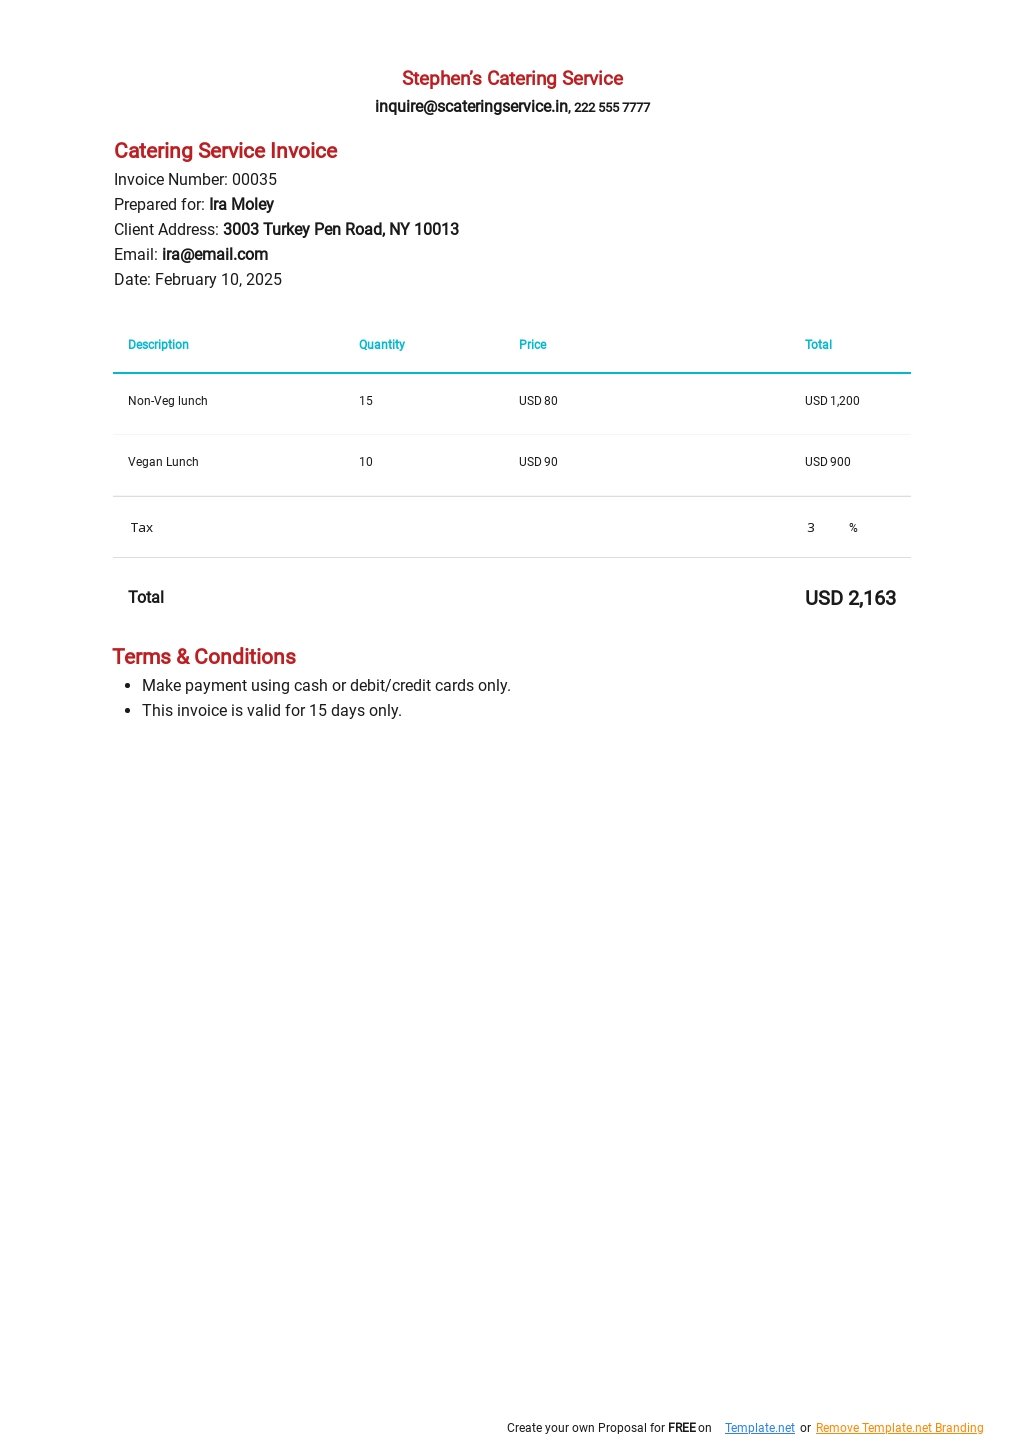 Editable Catering Service Invoice Template in Google Docs, Google